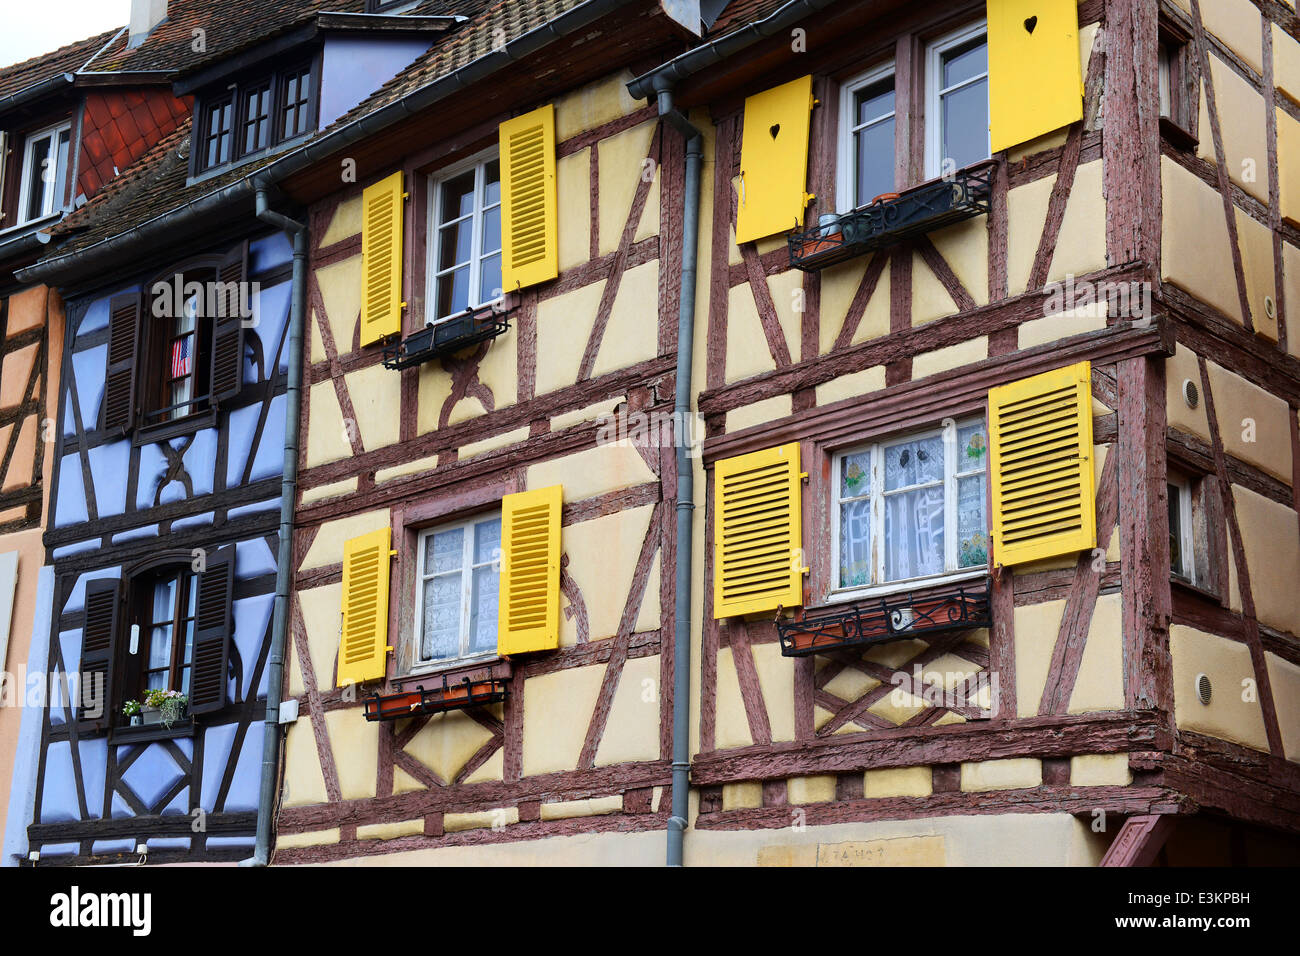 Colmar Alsace region France old half timbered buildings houses property Stock Photo